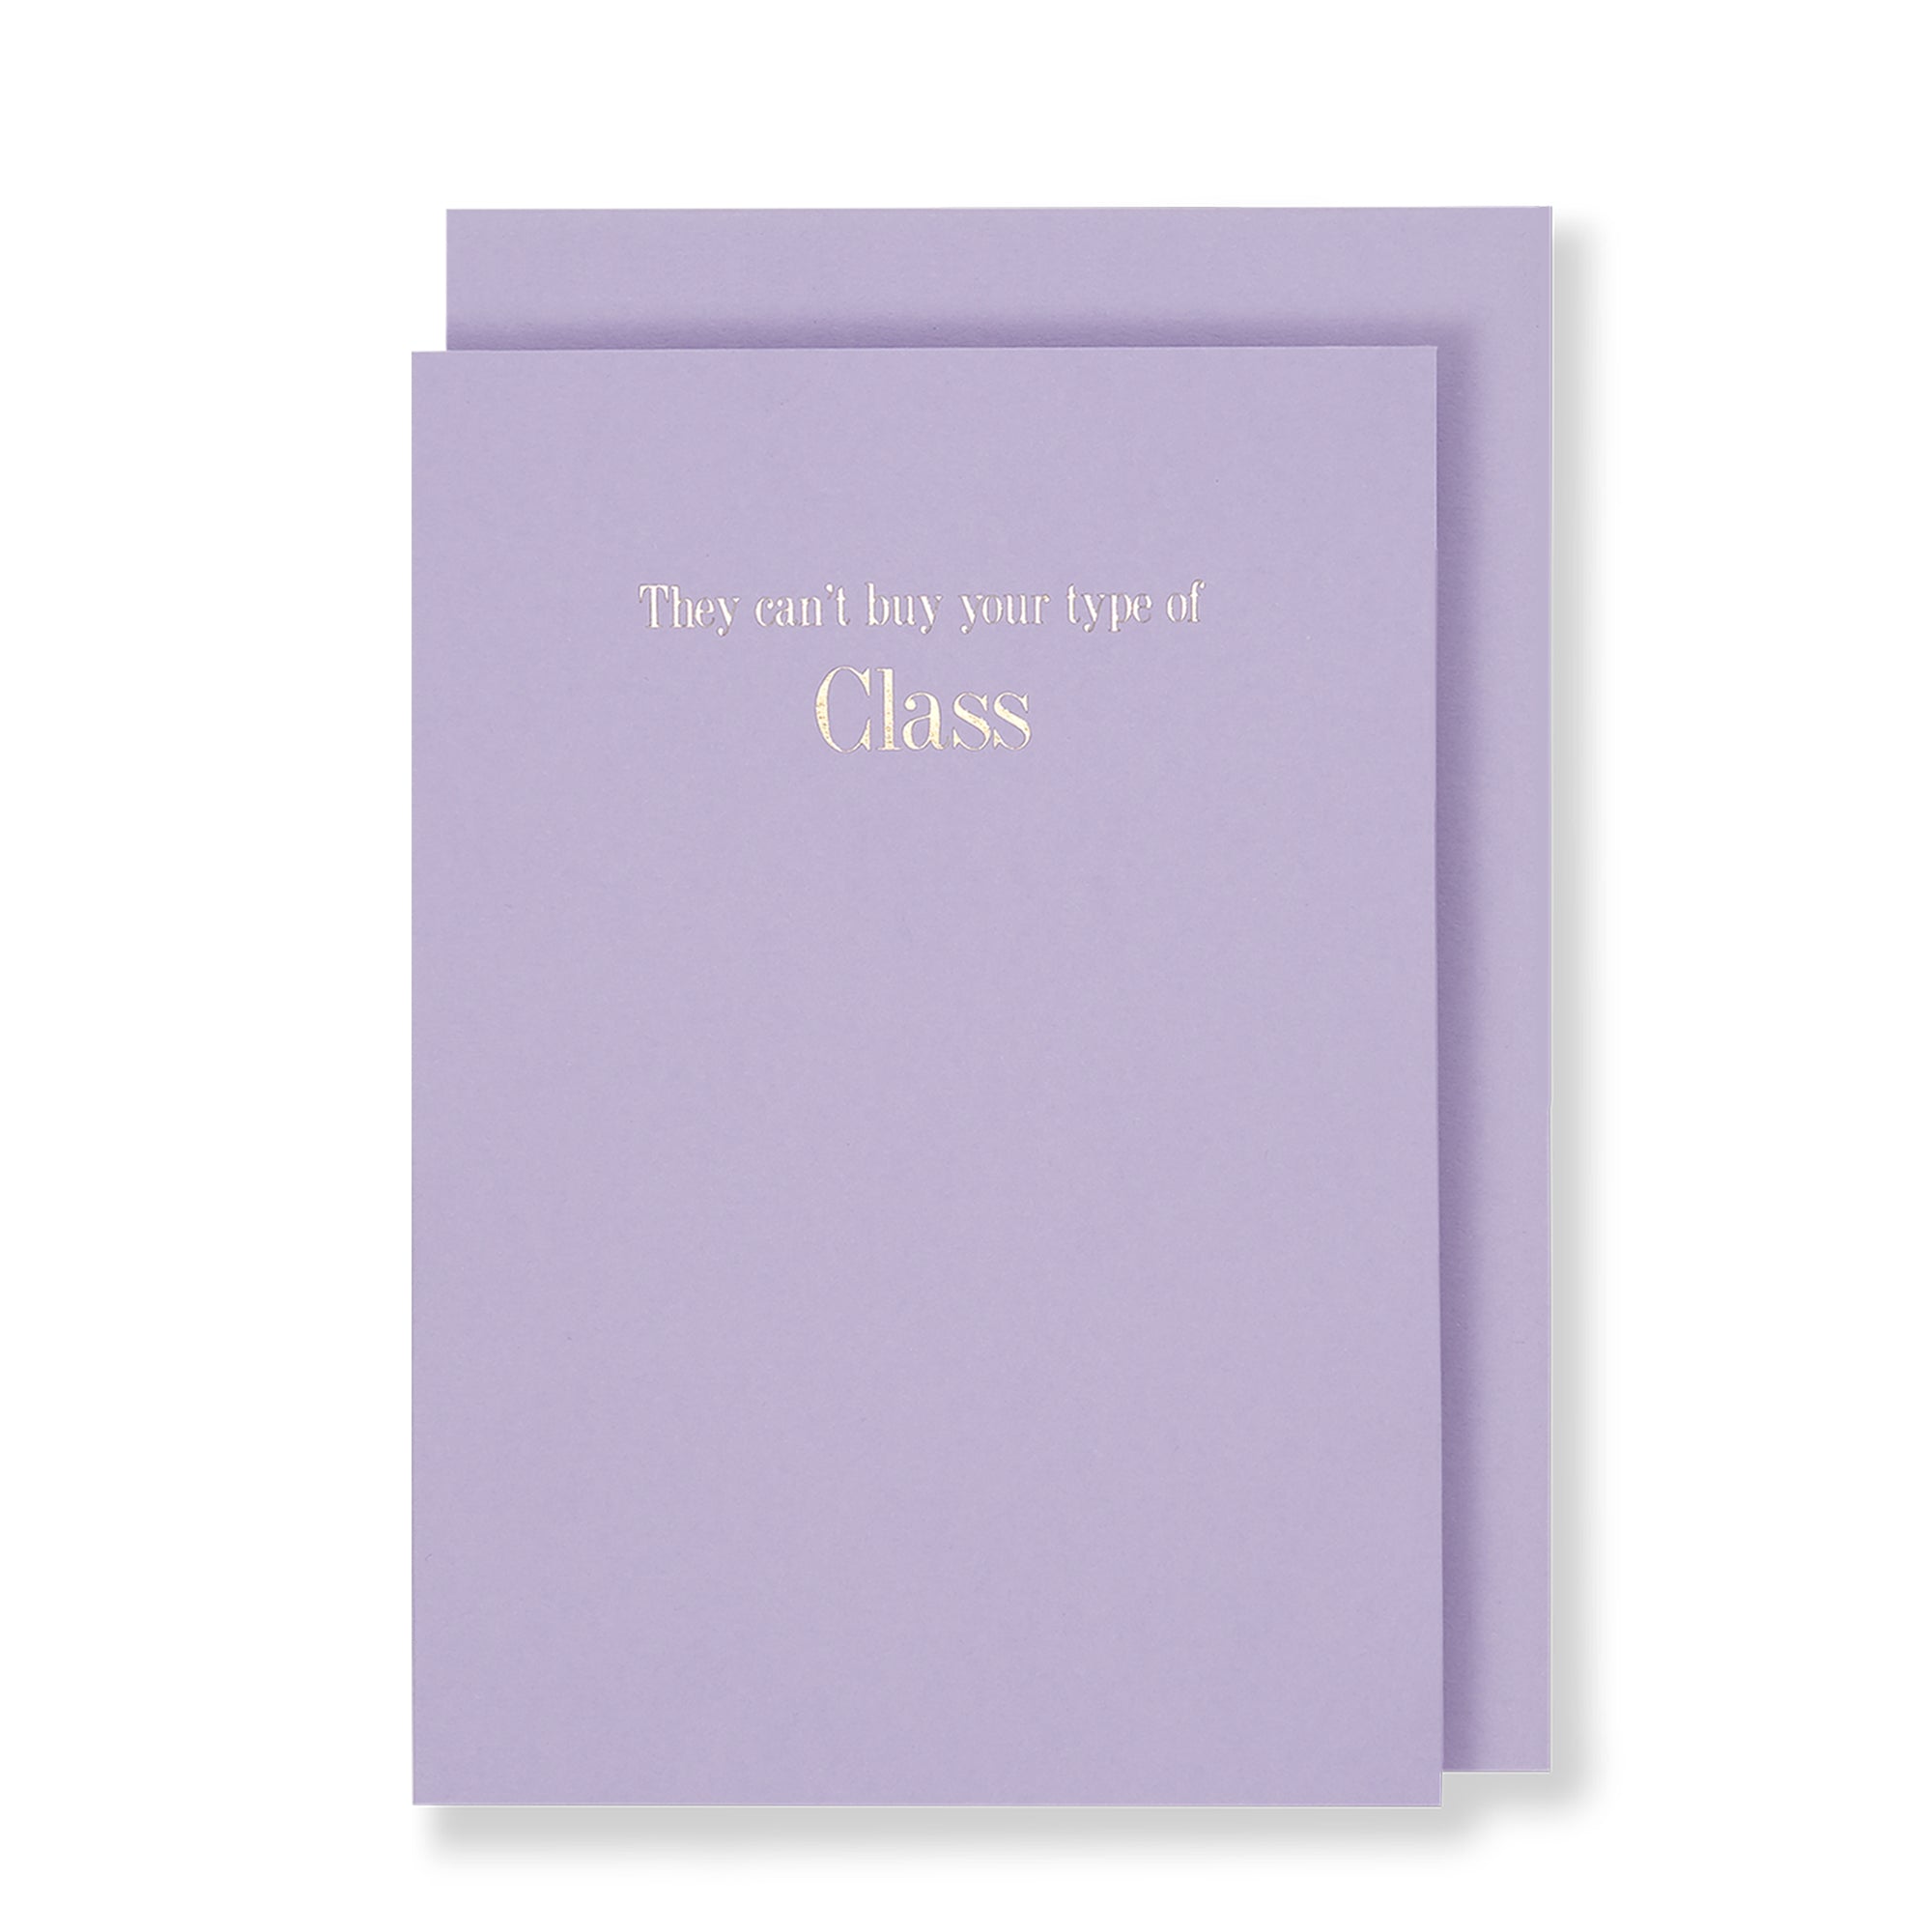 They Can't Buy Your Type of Class Greeting Card in Pastel Purple, Front